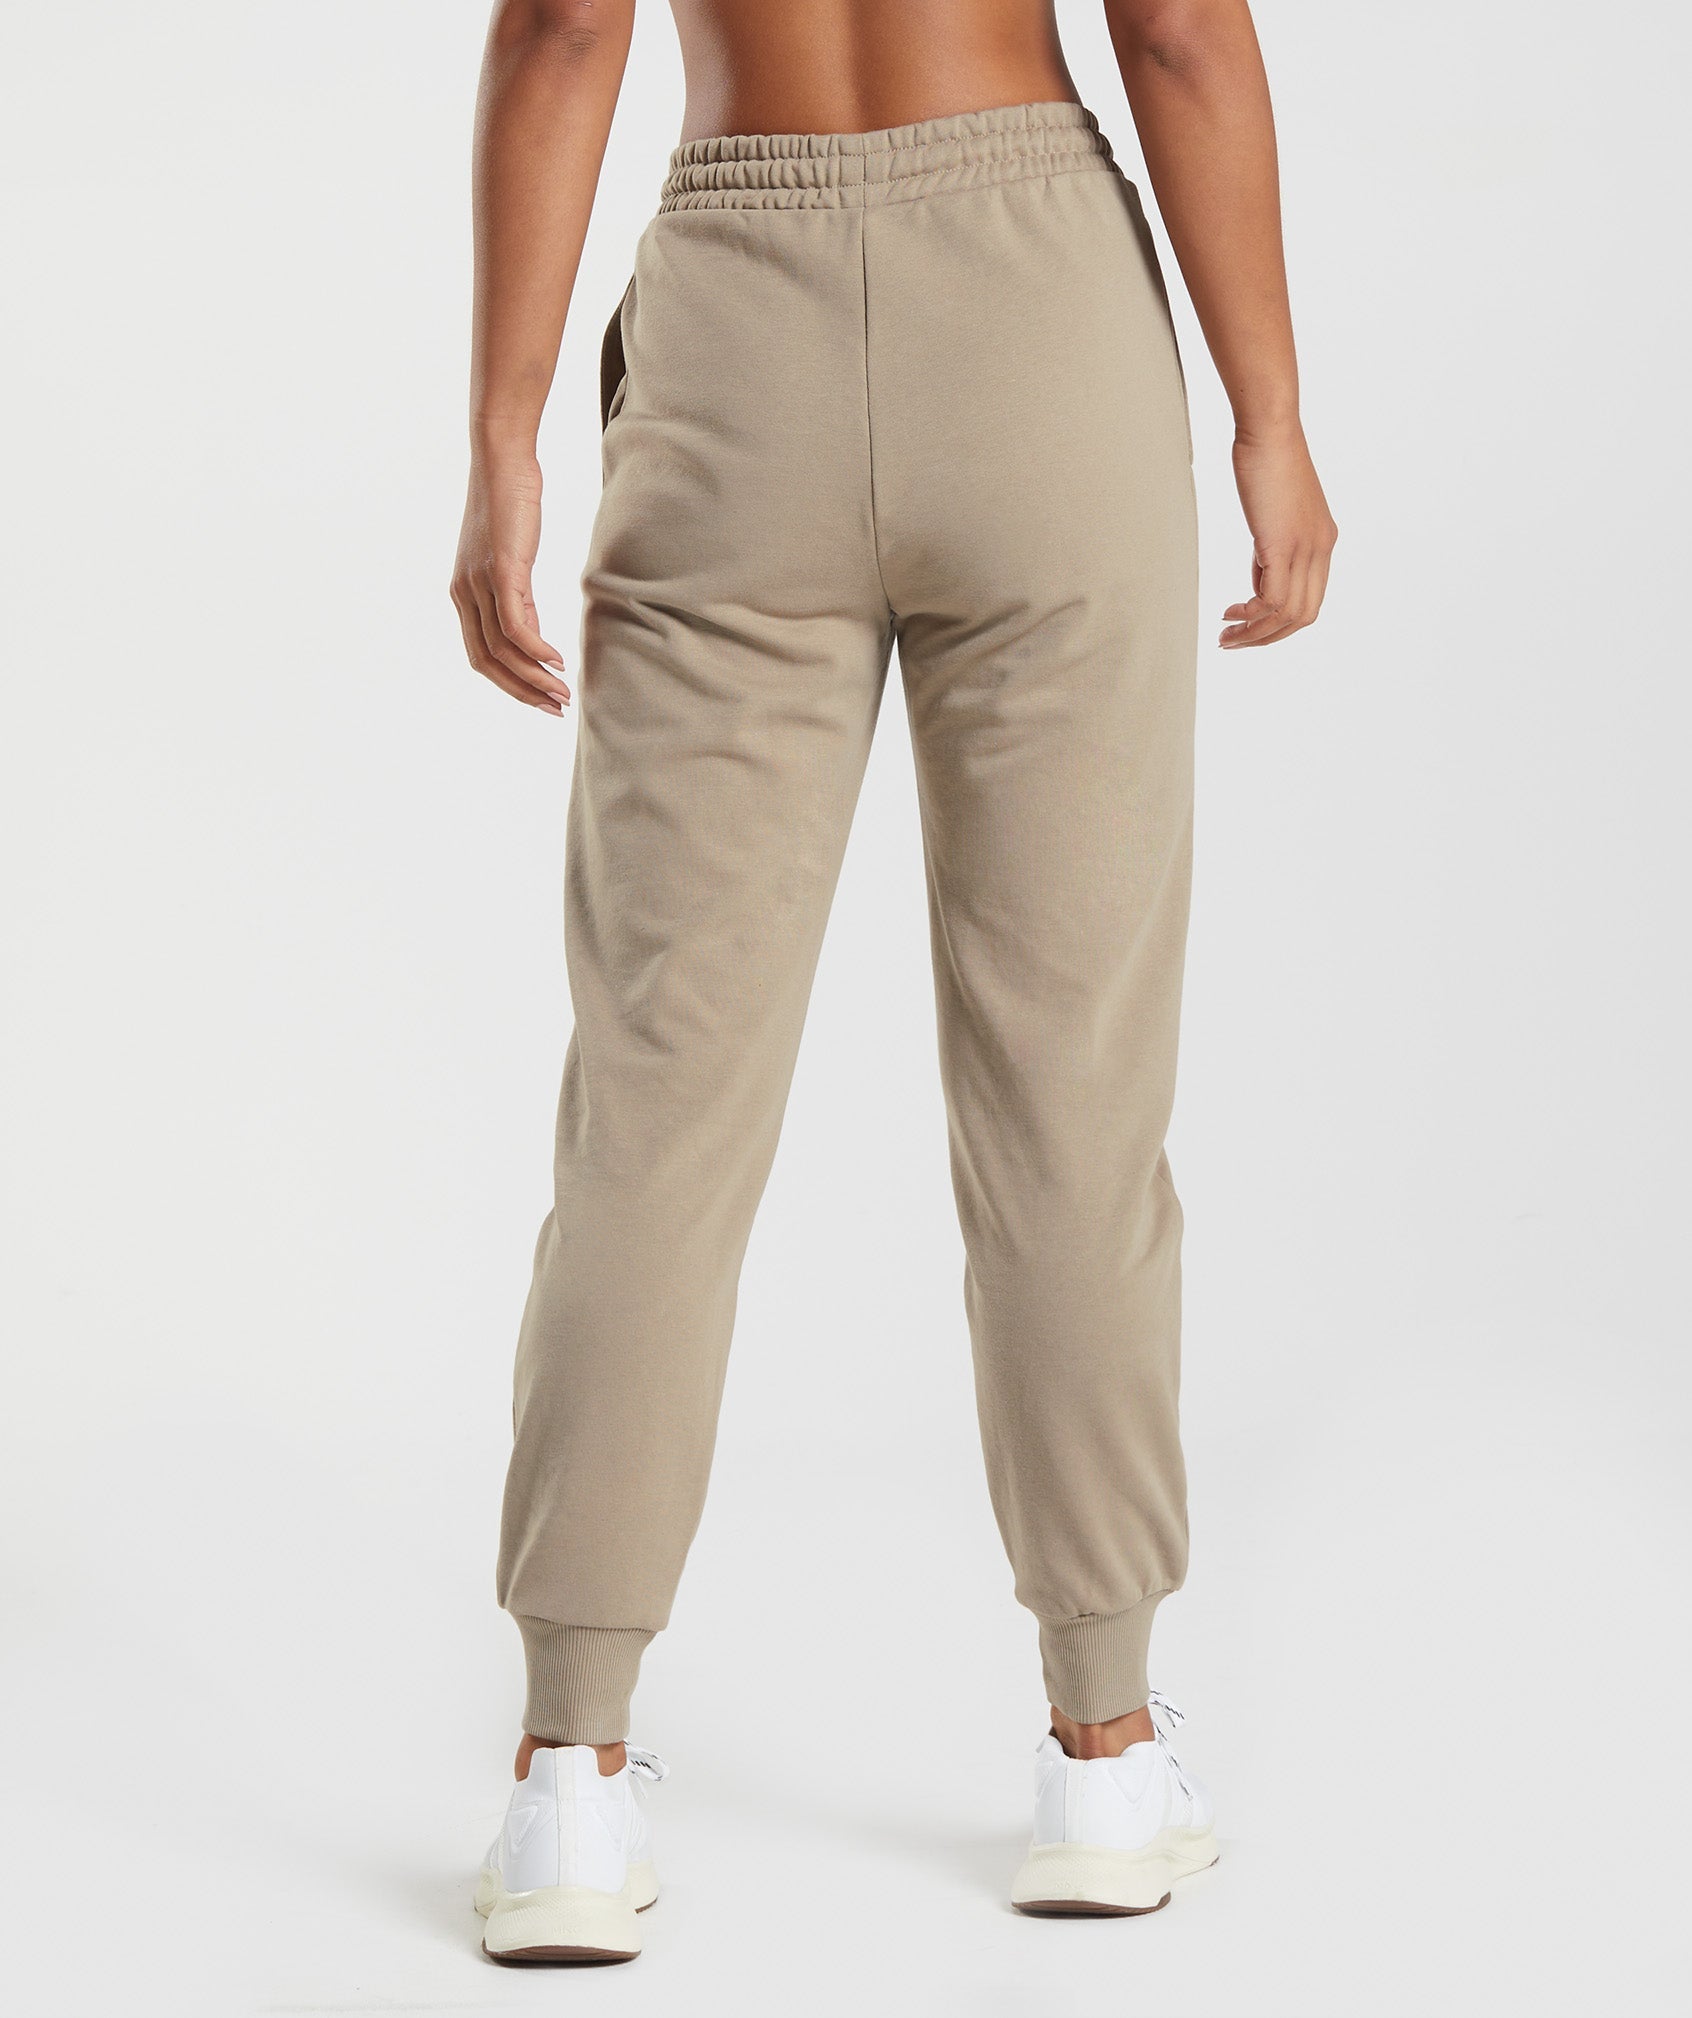 Get It Girl Joggers // FINAL SALE – STONE + WILLOW